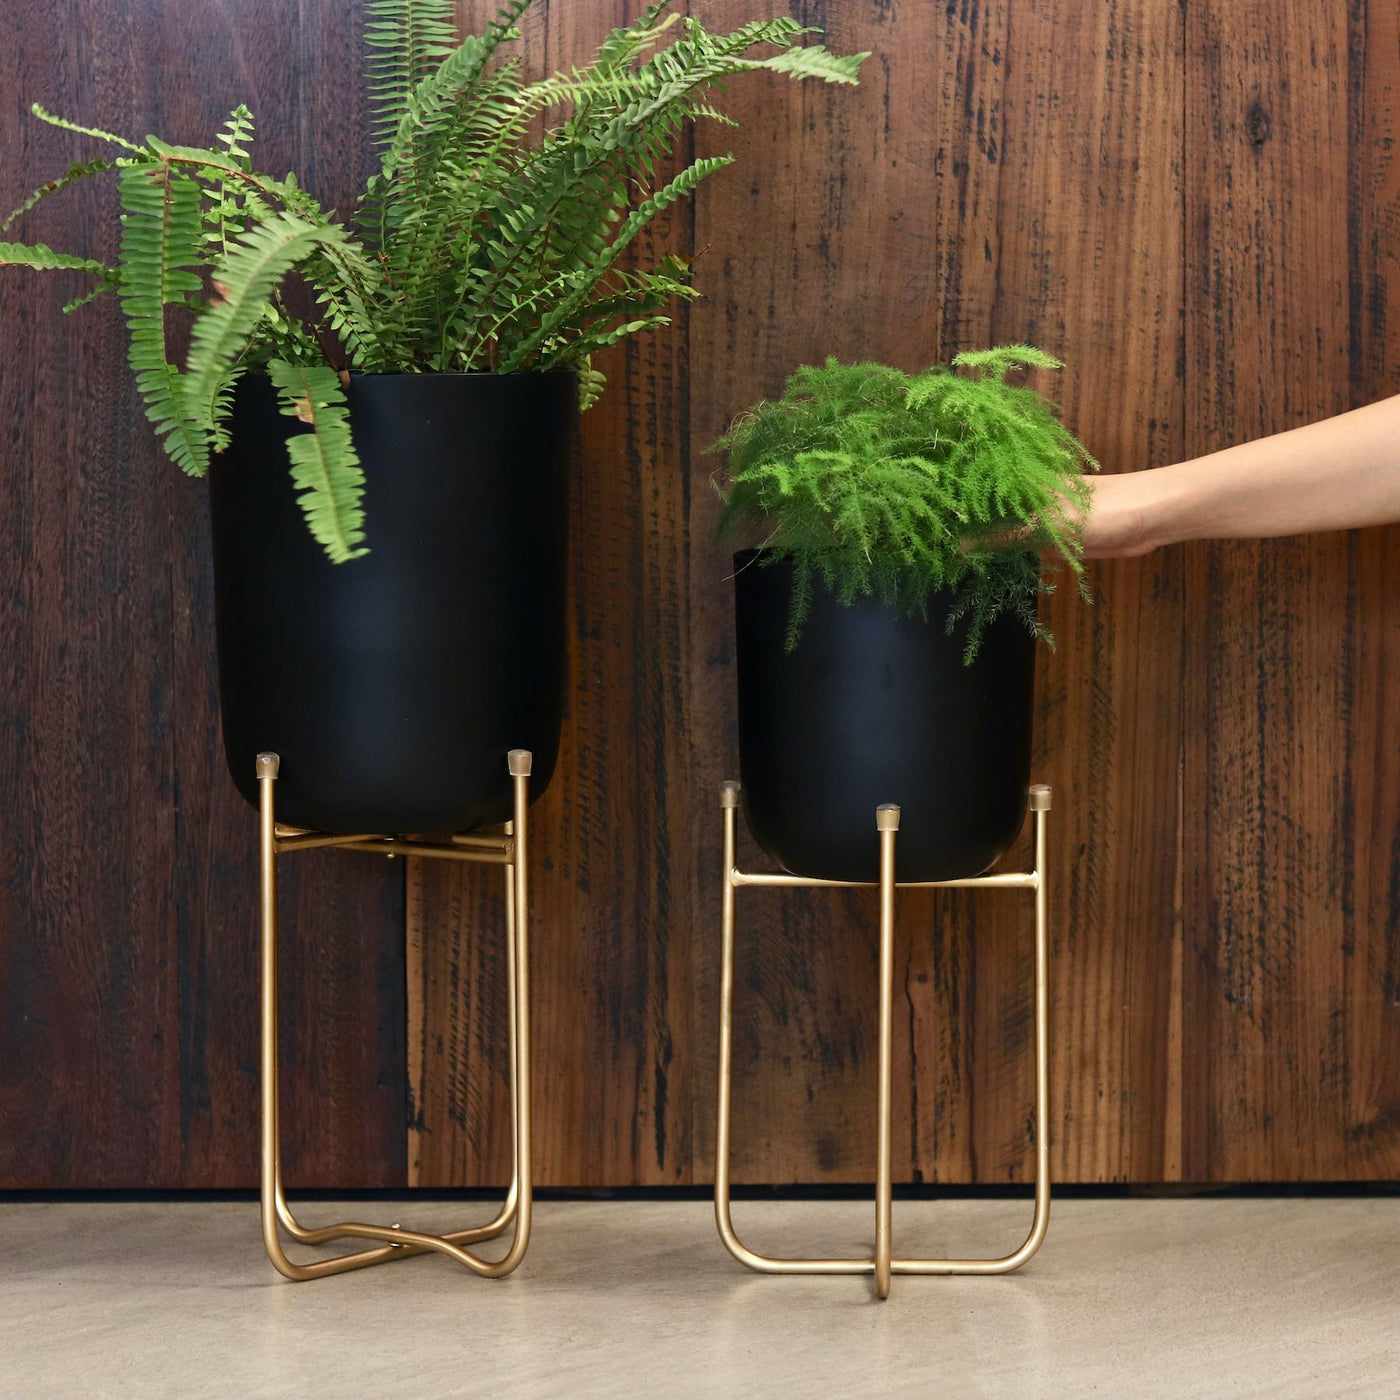 black metal planters with legs